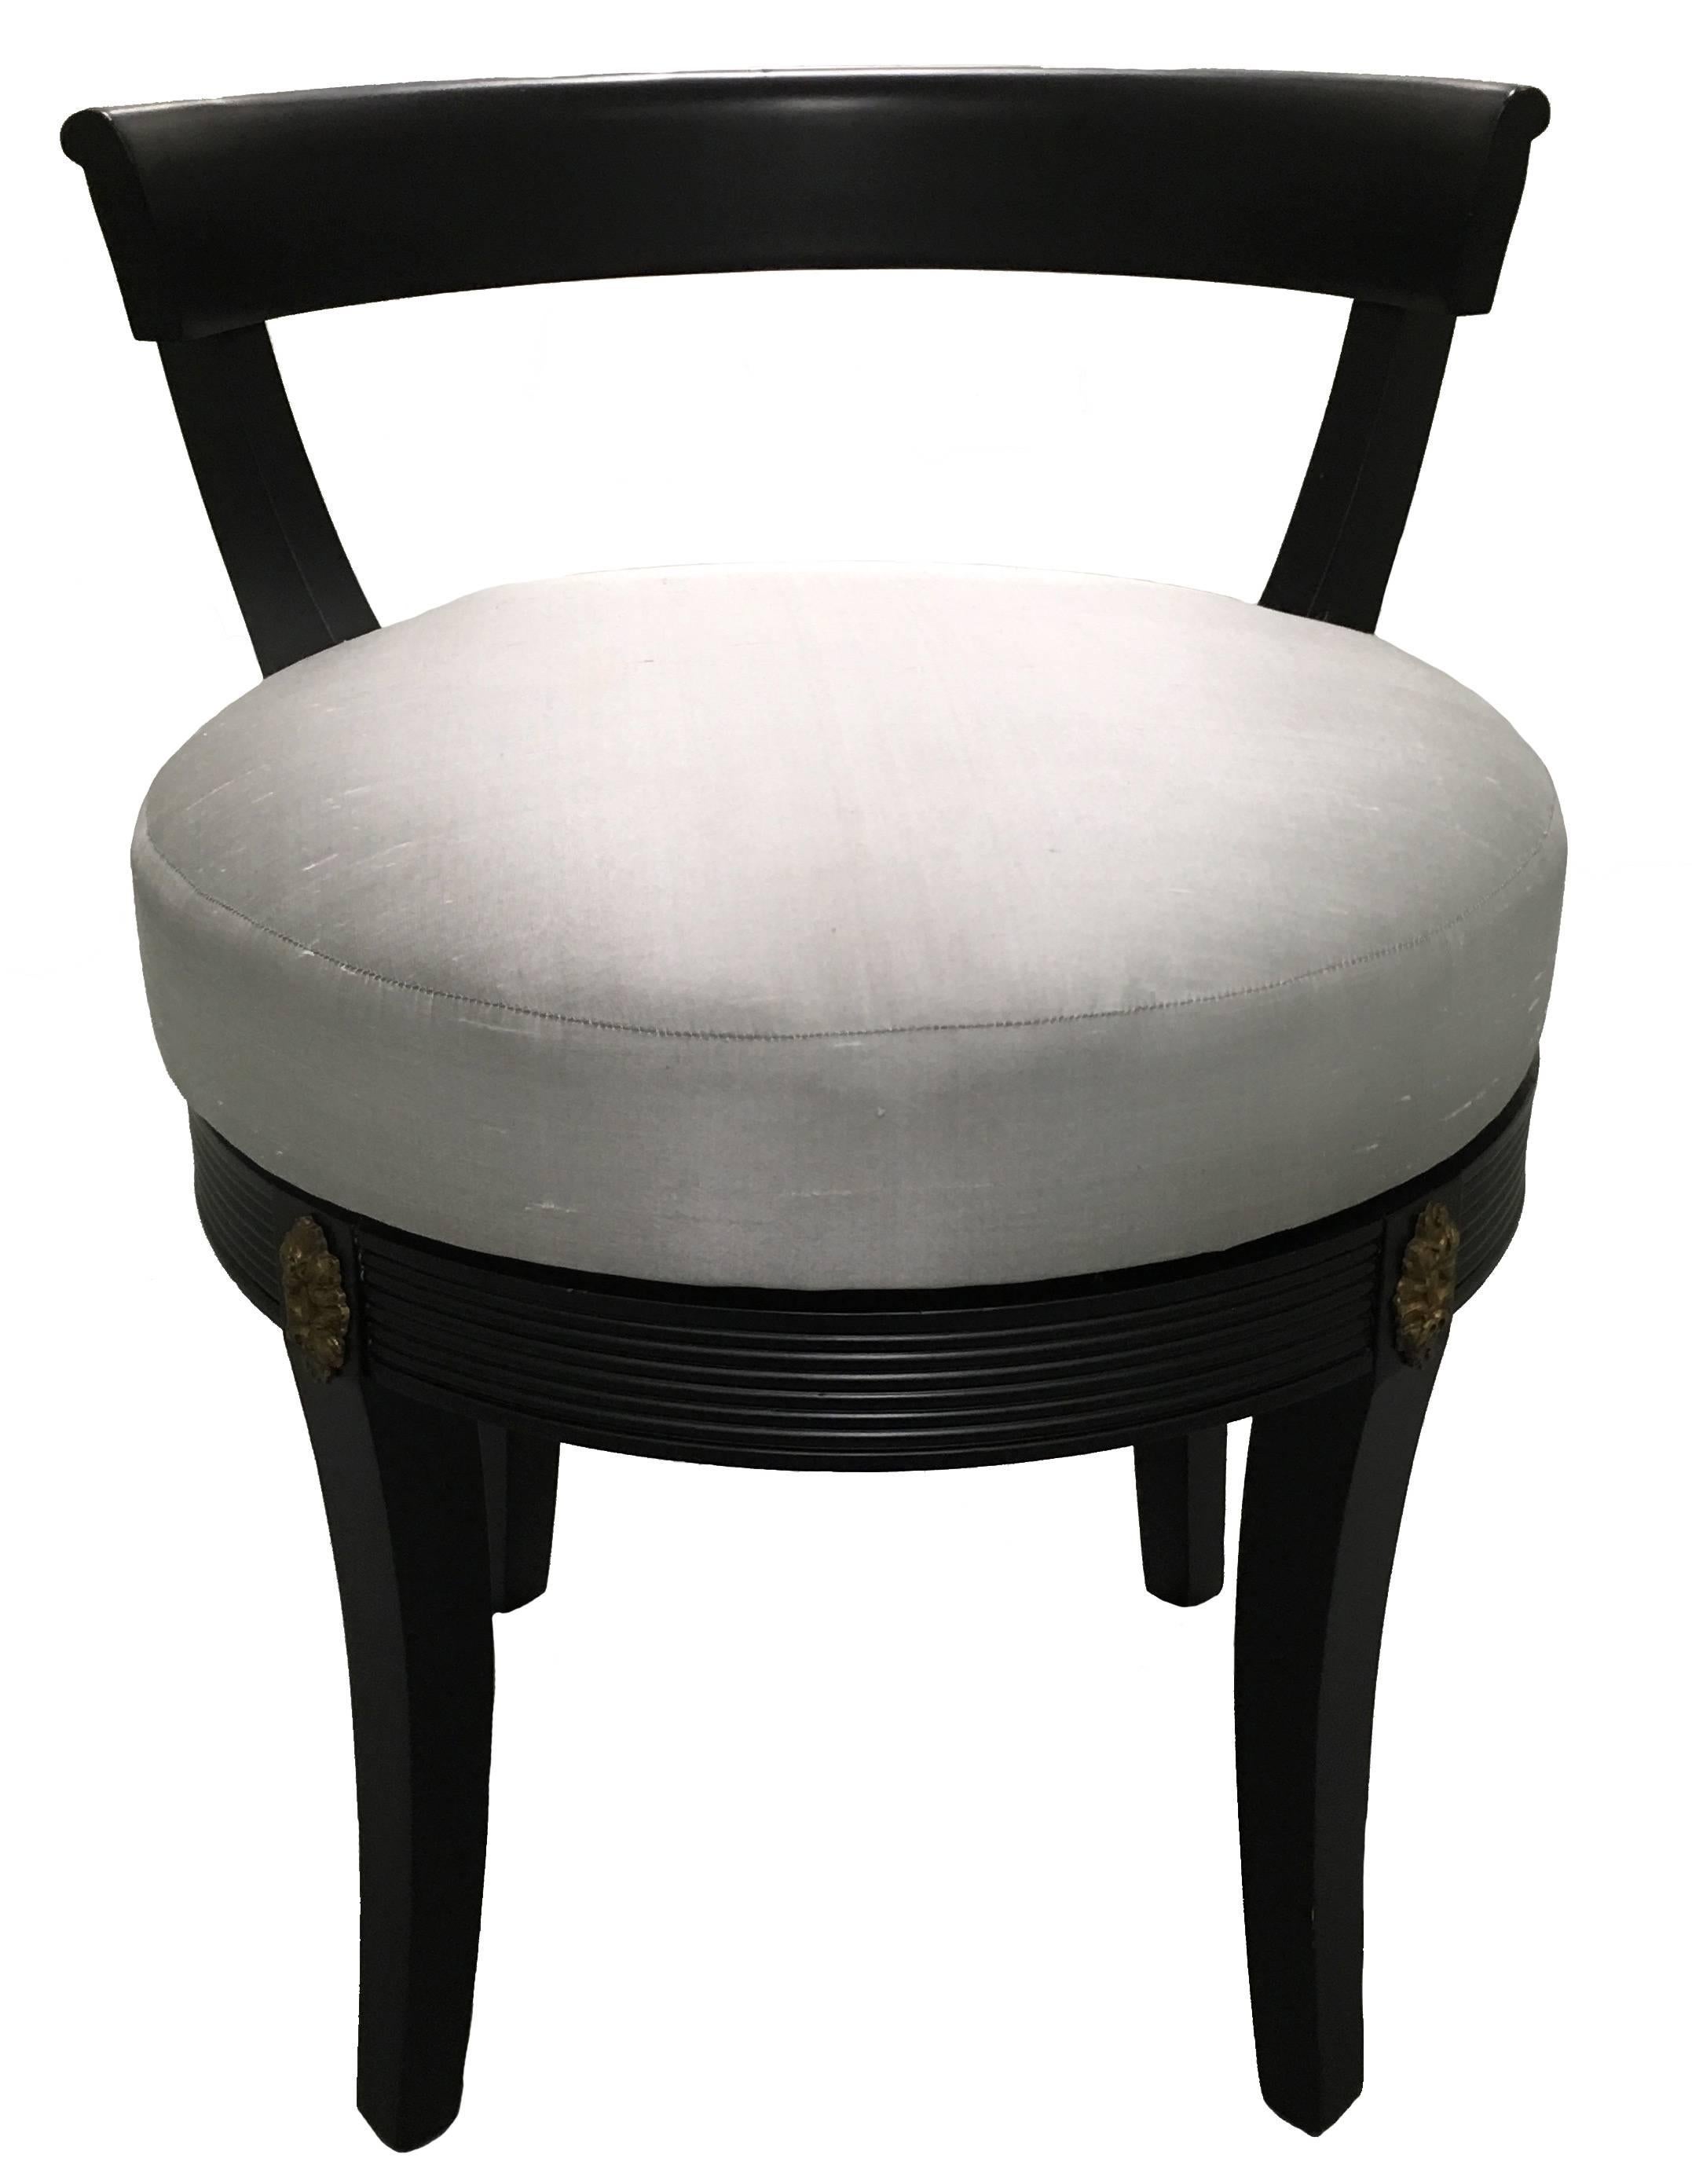 1940s Hollywood Regency style vanity chair. Brass rosette corner detailing. Klismos style design. Swivel seat. Newly painted in black satin finish. Newly upholstered in grey silk fabric.